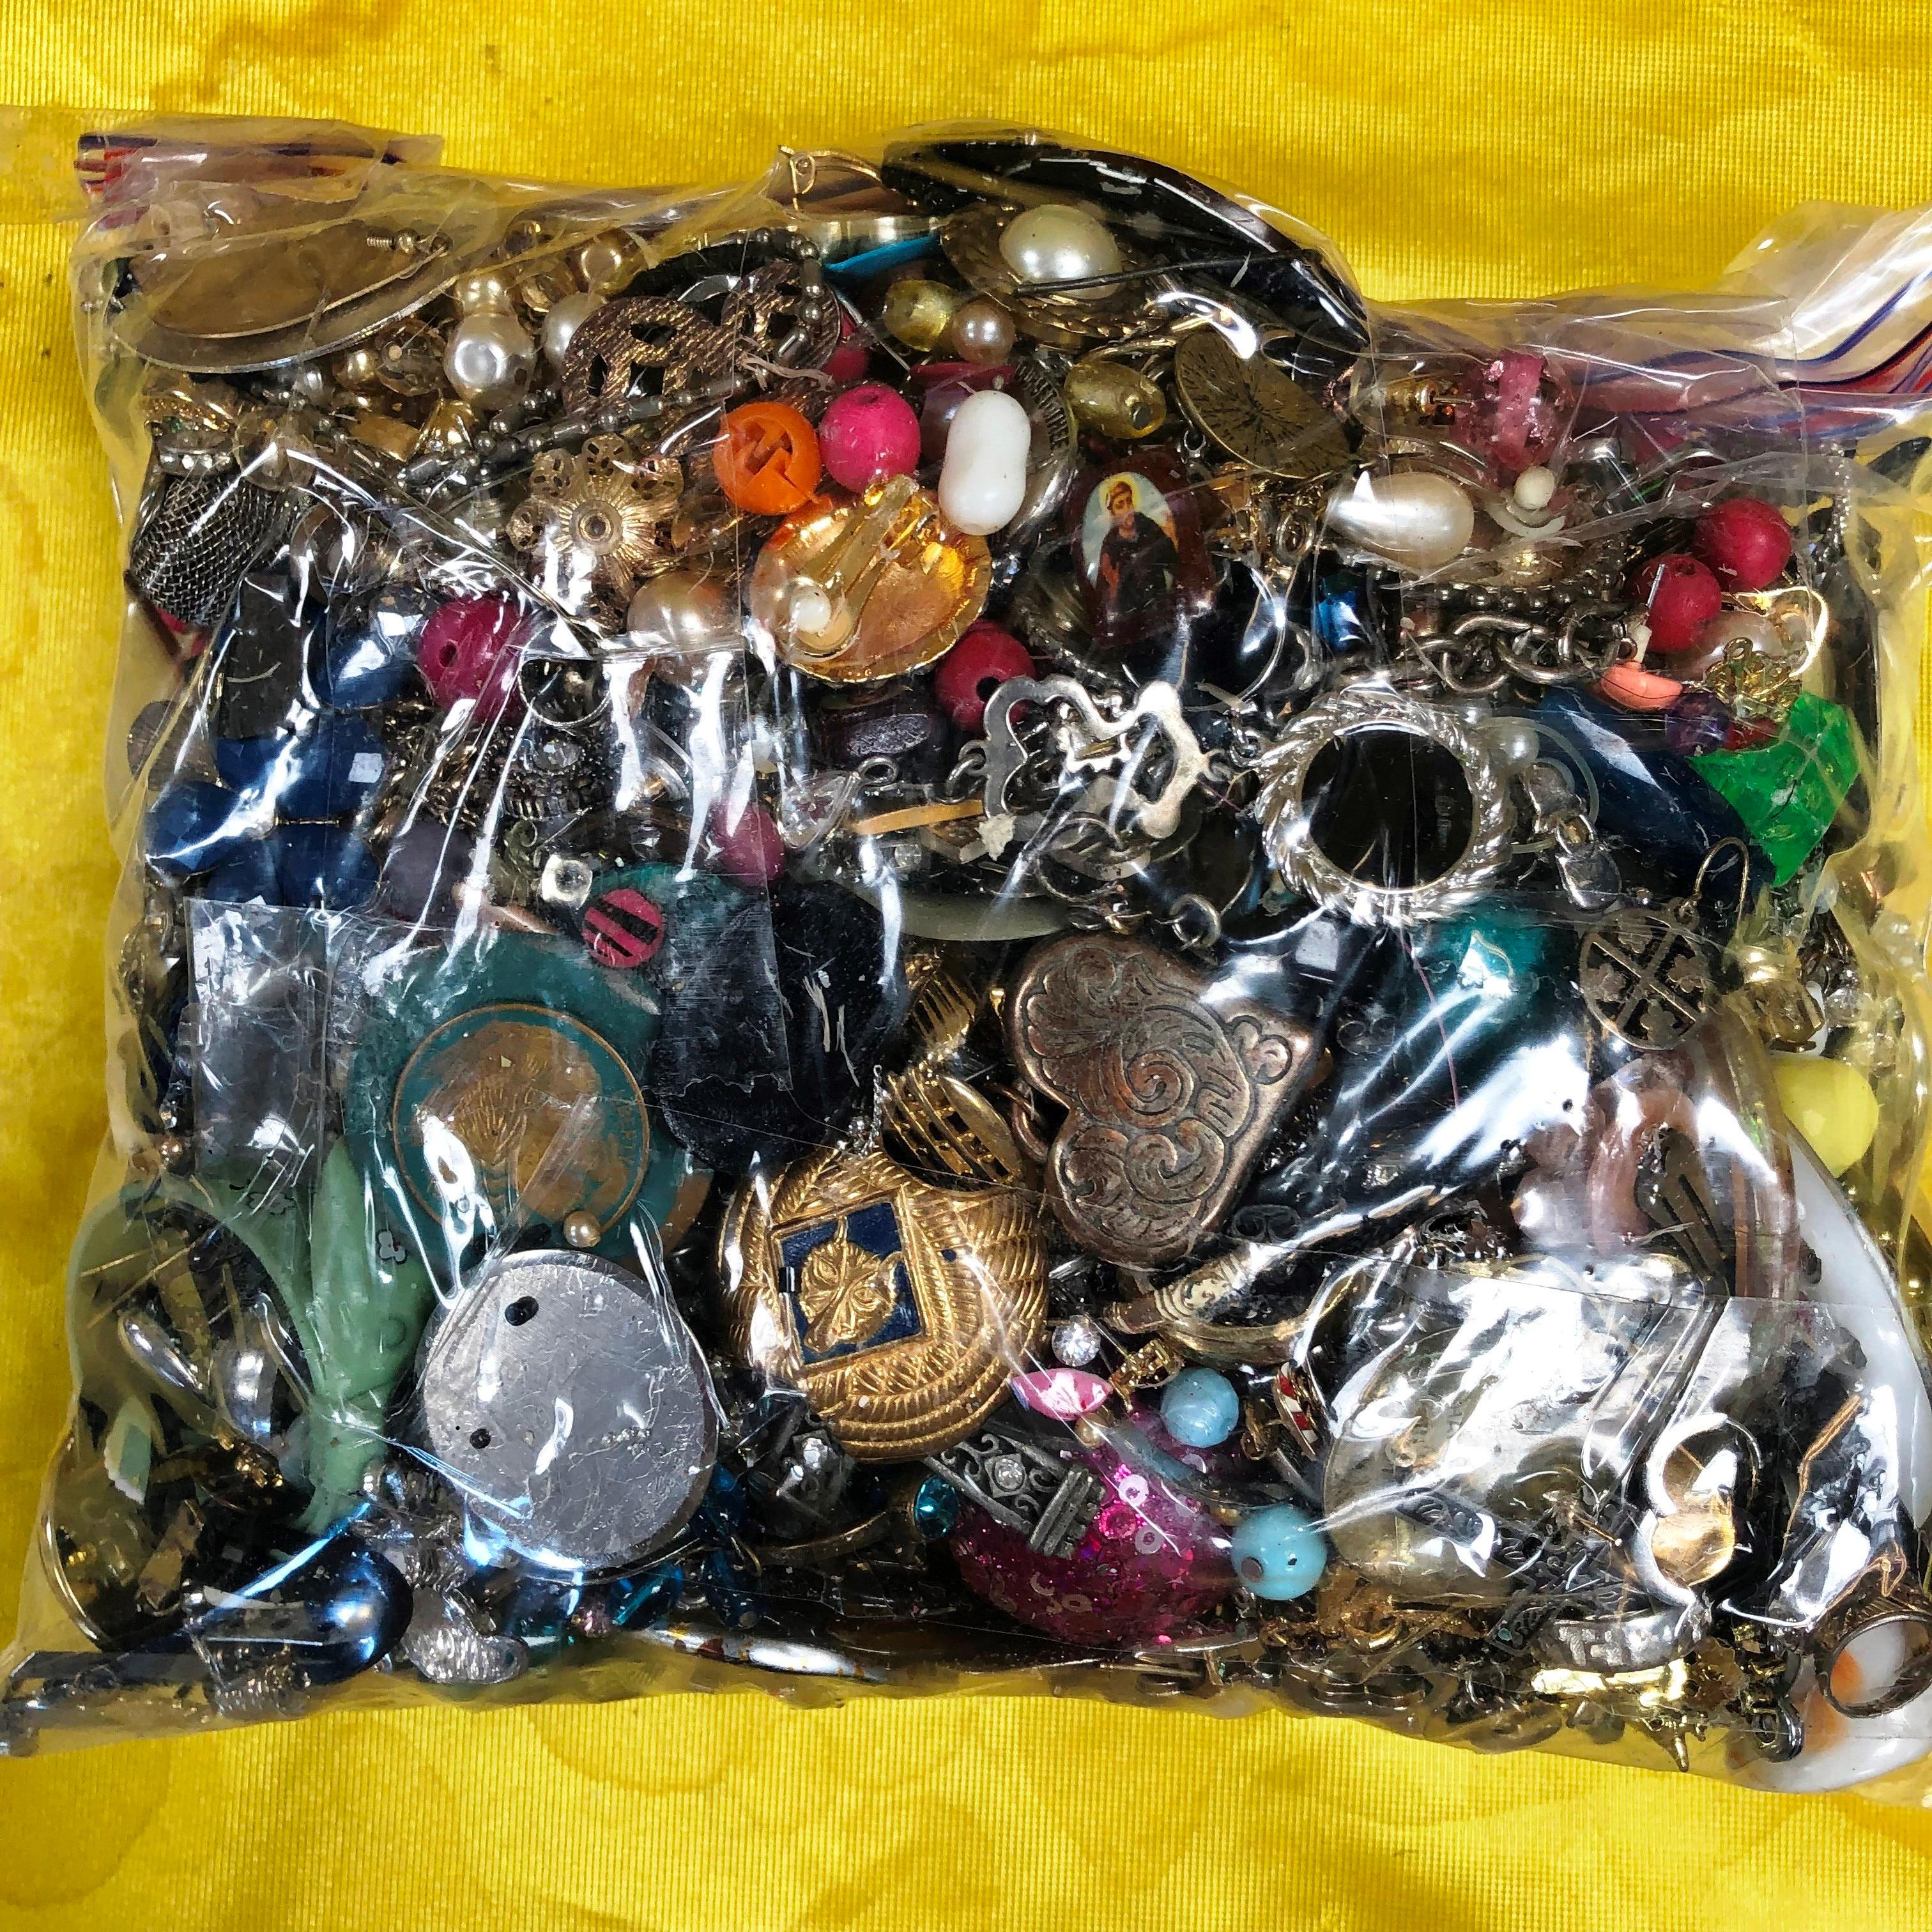 LOT OF 7.8 Lbs. OF ASSORTED COSTUME JEWELRY FROM ESTATE - LOT A